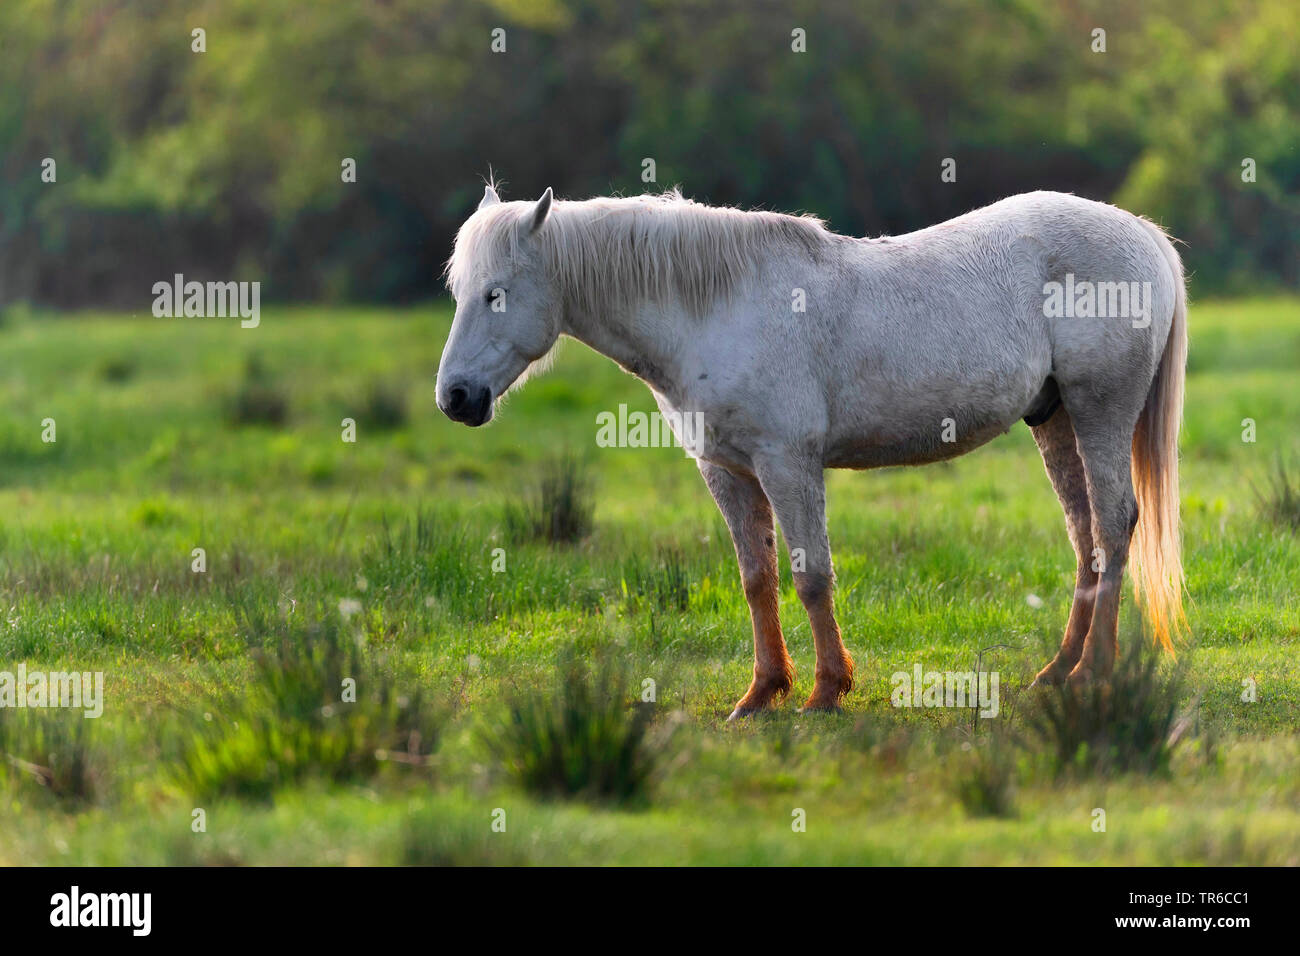 Camargue horse (Equus przewalskii f. caballus), sleeps while standing, side view, Spain Stock Photo